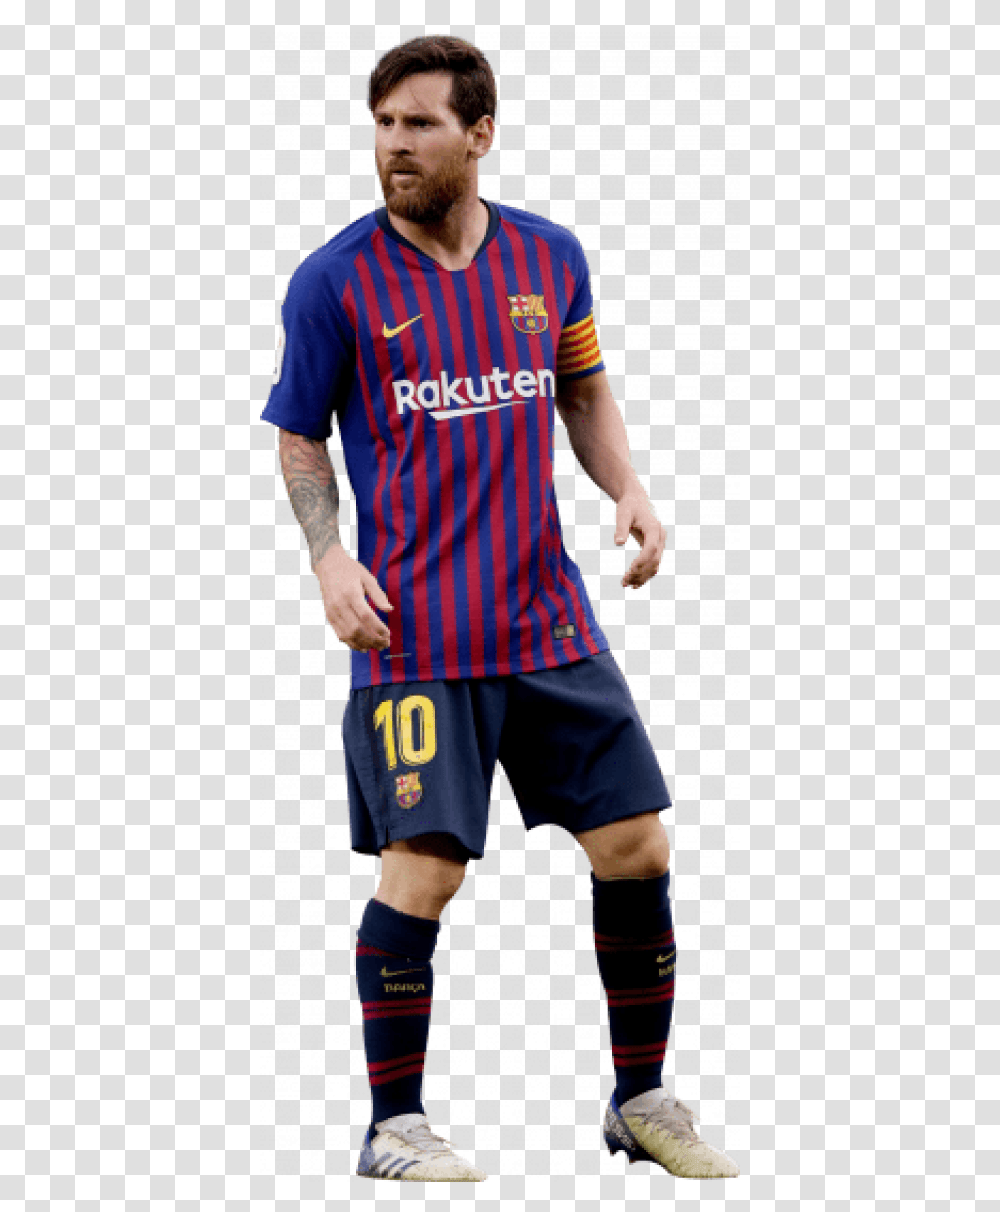 Free Download Lionel Messi Images Background Lionel Messi, Shorts, Person, Sphere Transparent Png